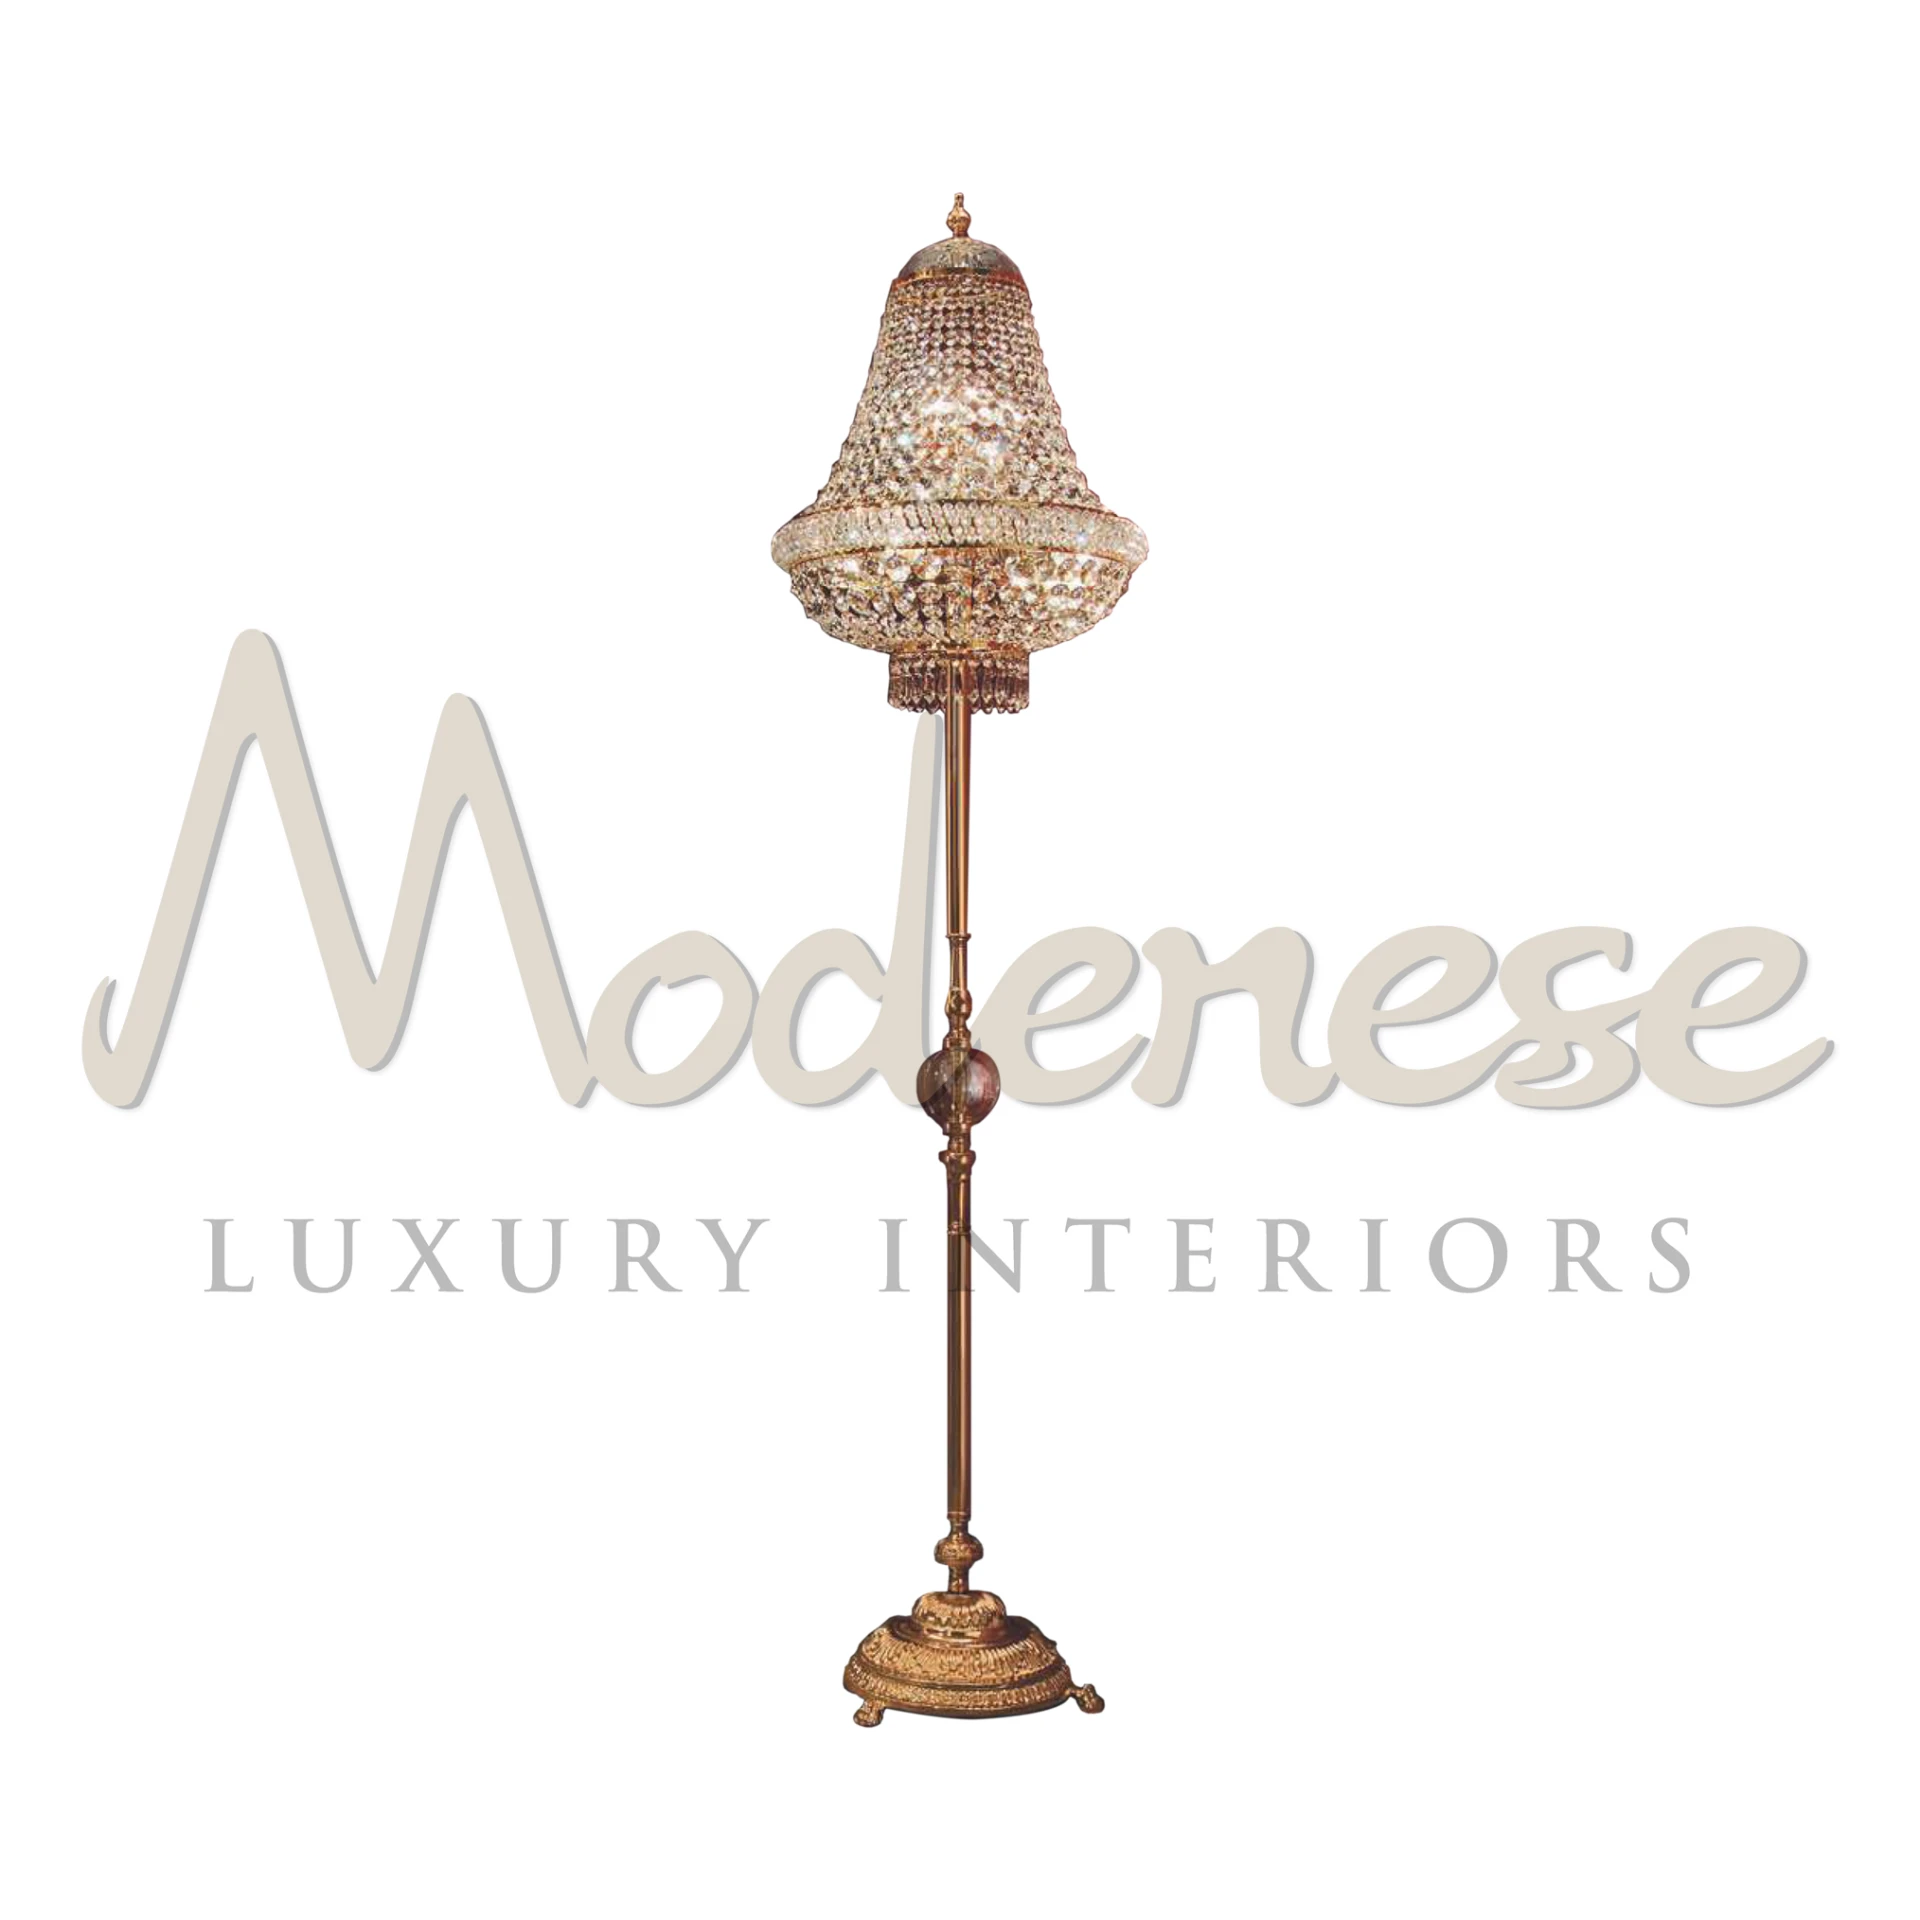 Royal Sconce Floor Luminary with a shining crystals shade and fancy gold stand